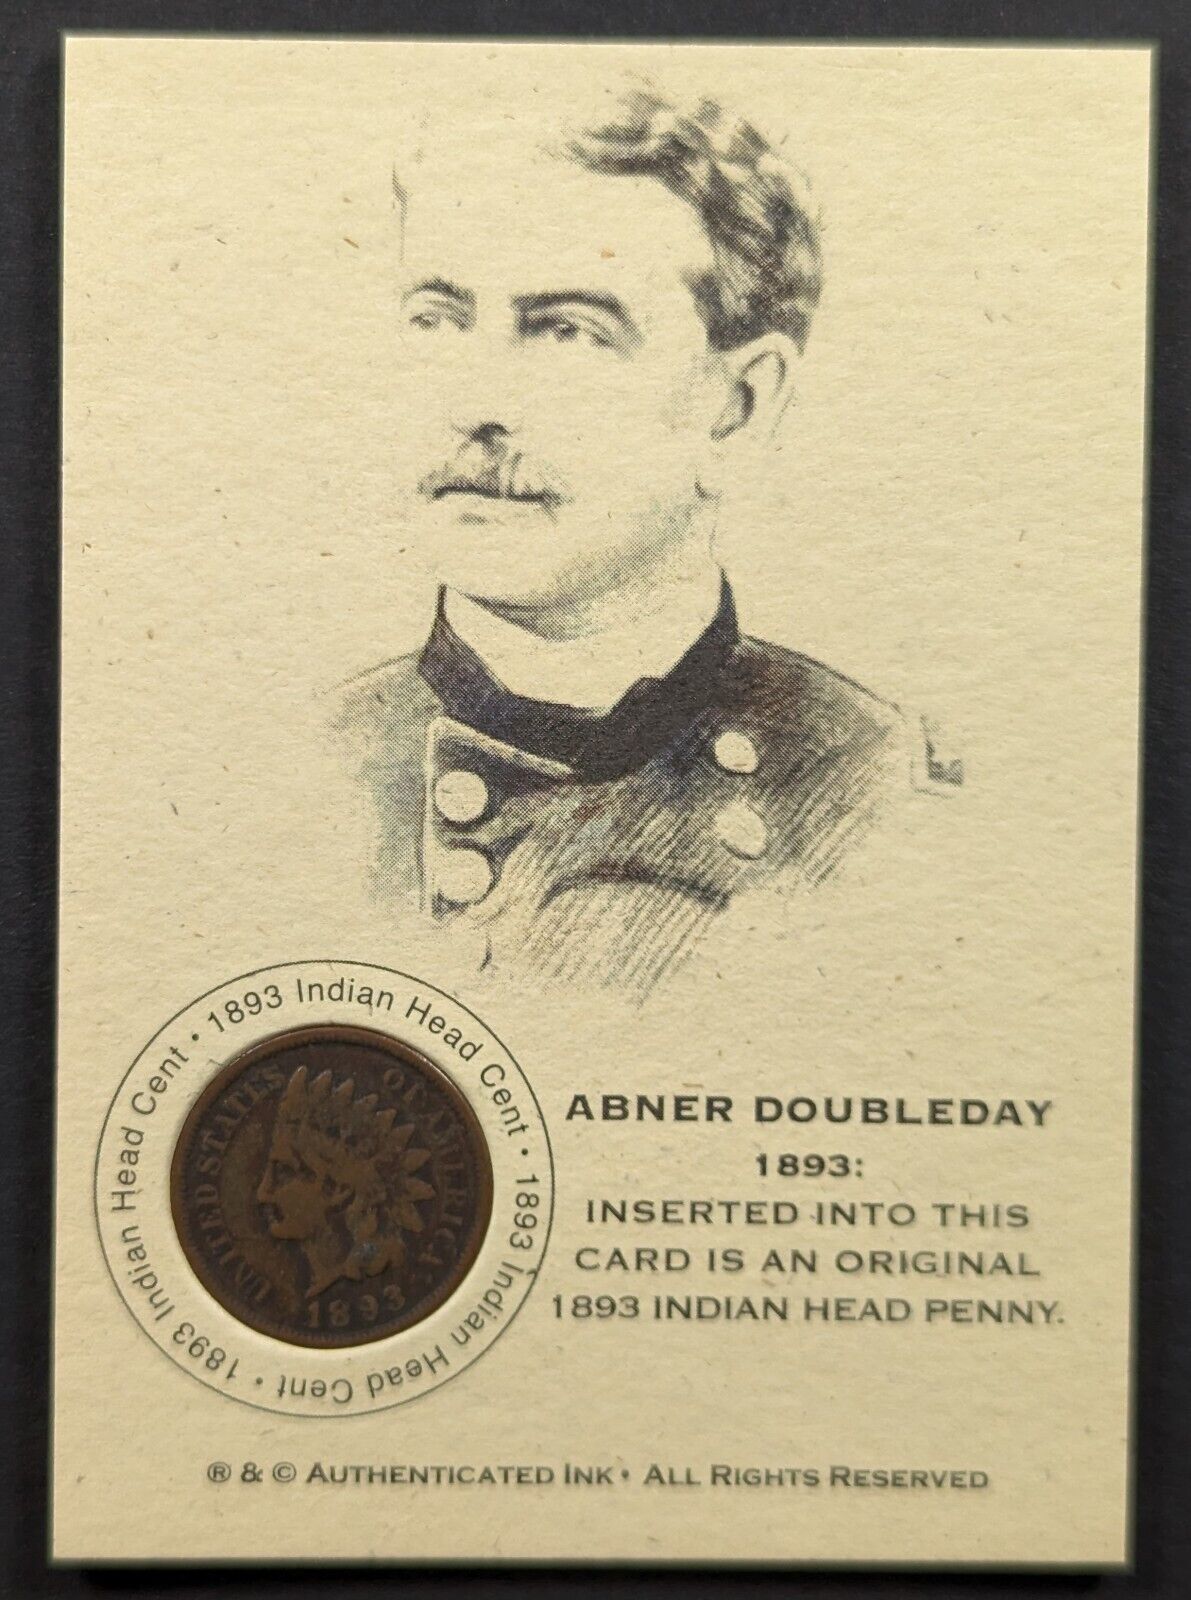 Abner Doubleday 2008 Authenticated Ink Card With Penny